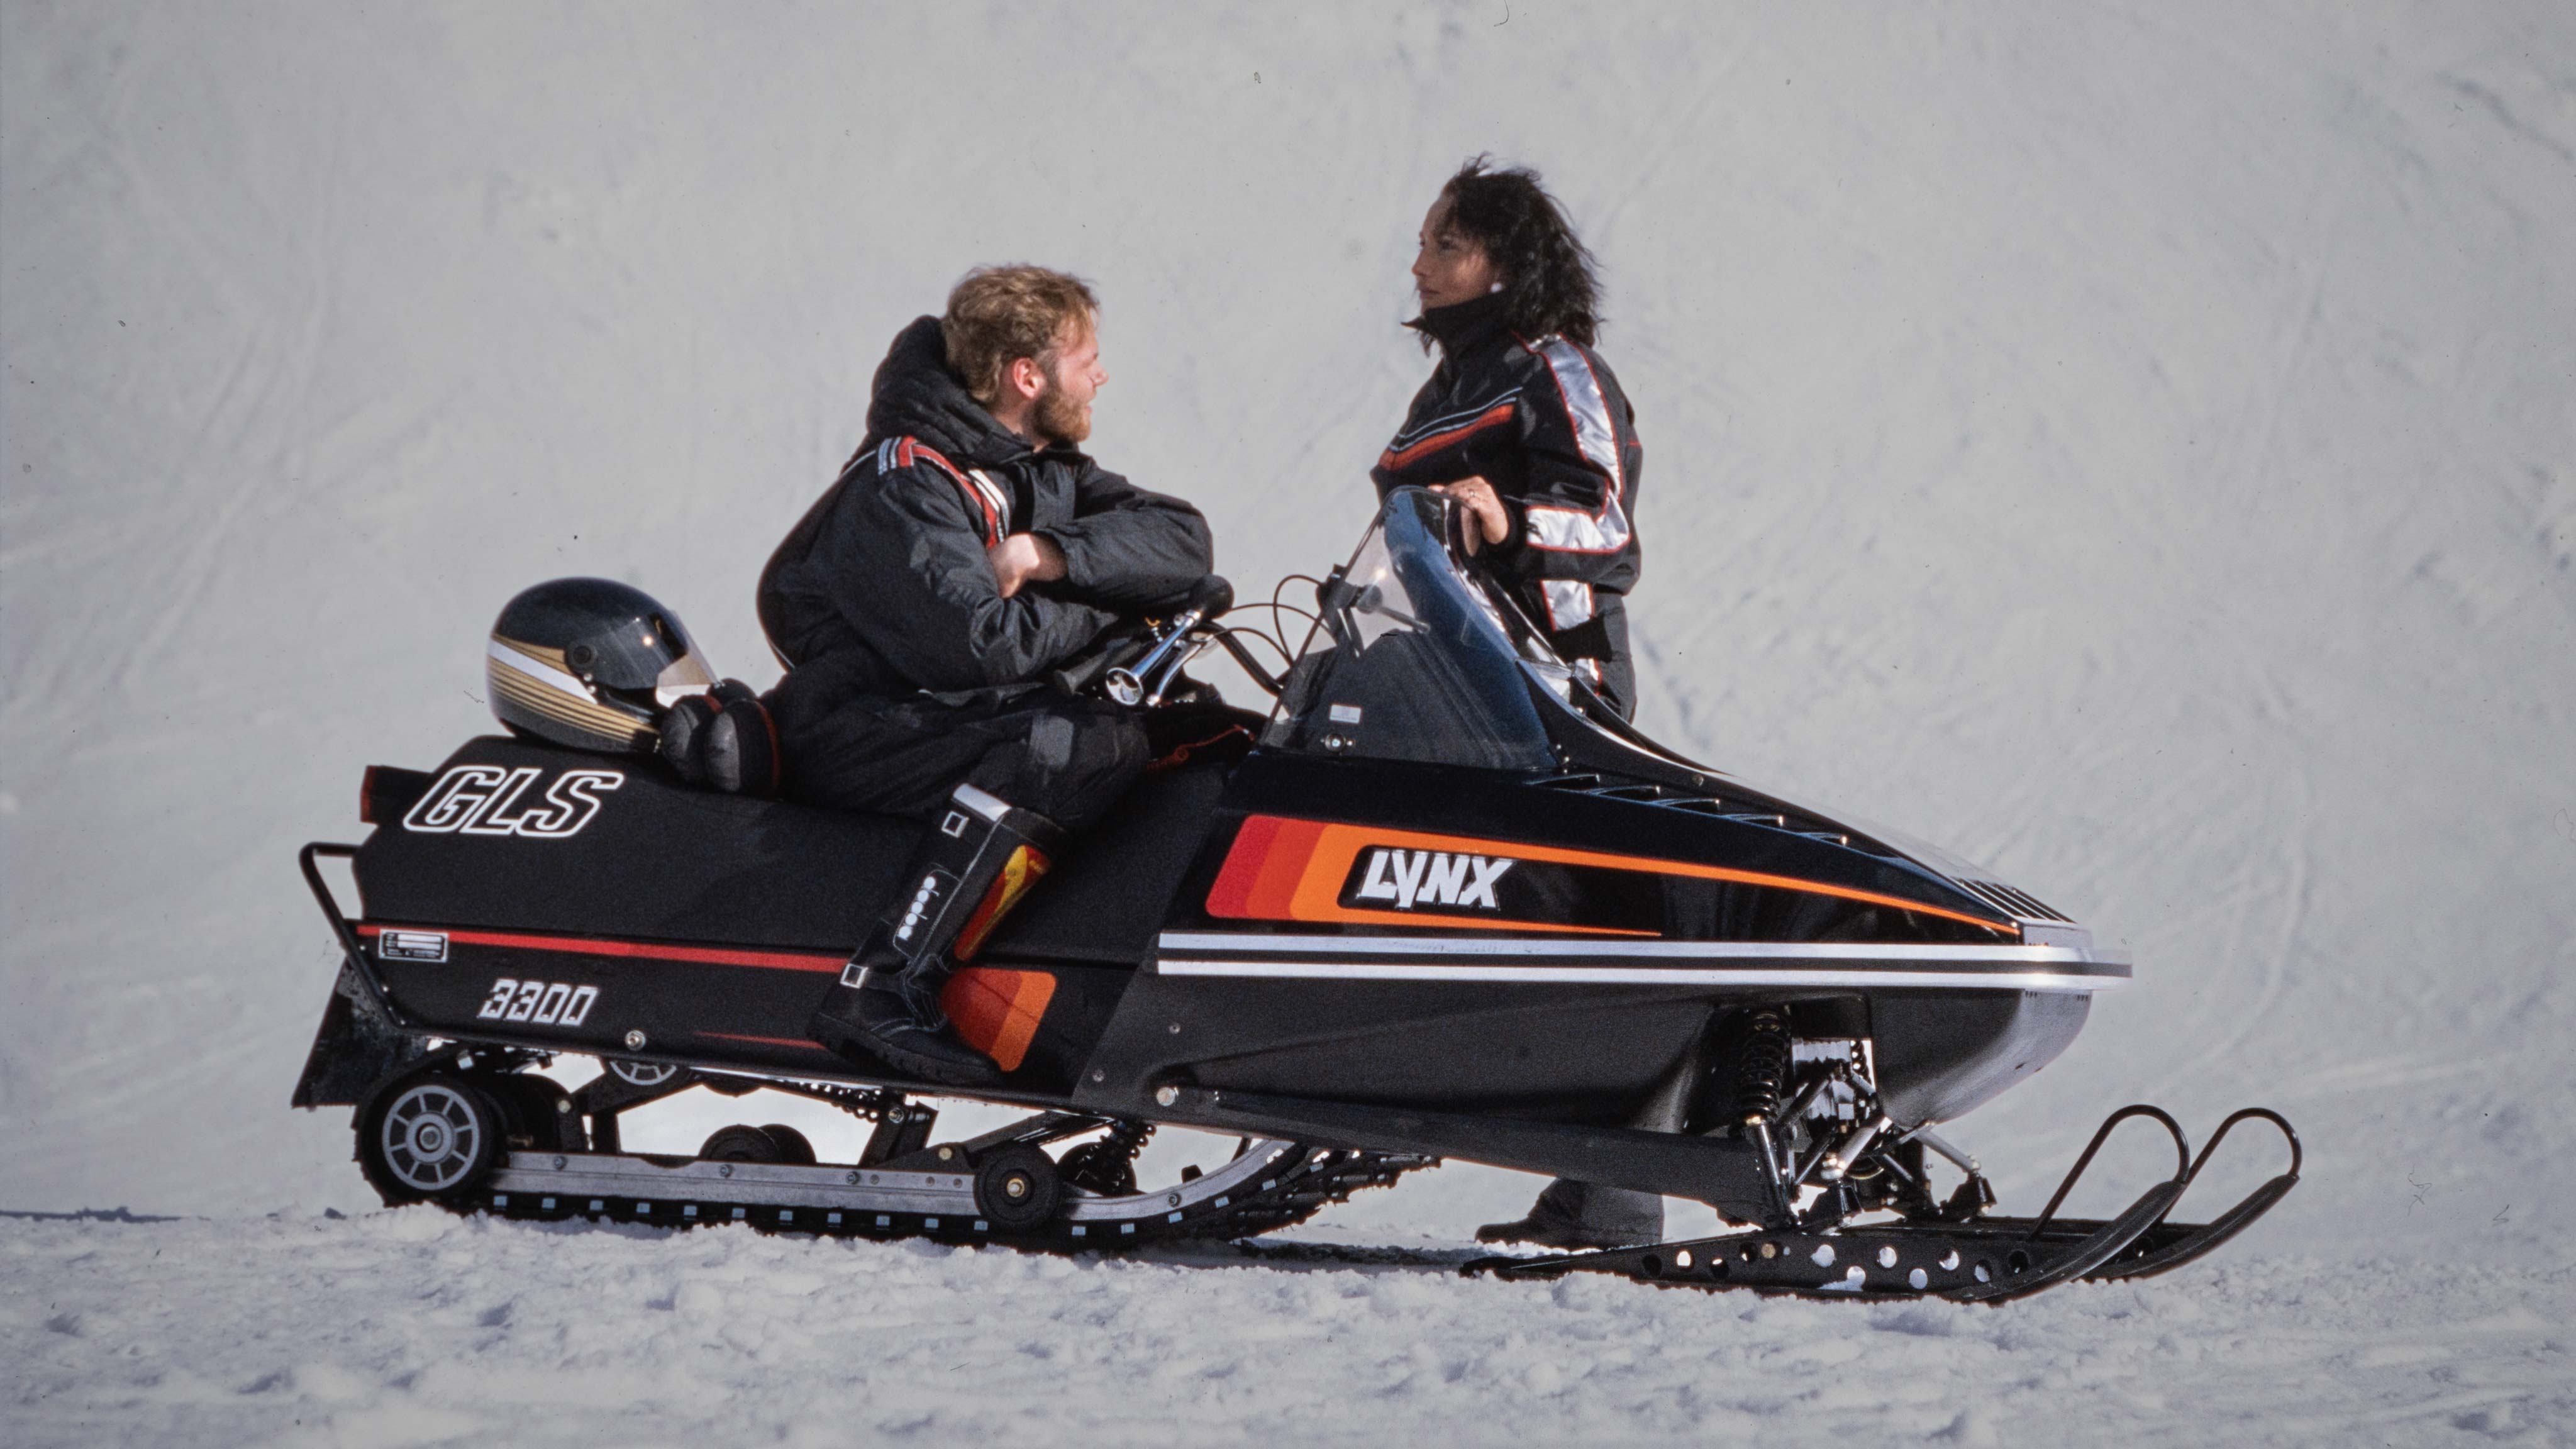 Couple chatting on Lynx GLS 3300 1985 snowmobile